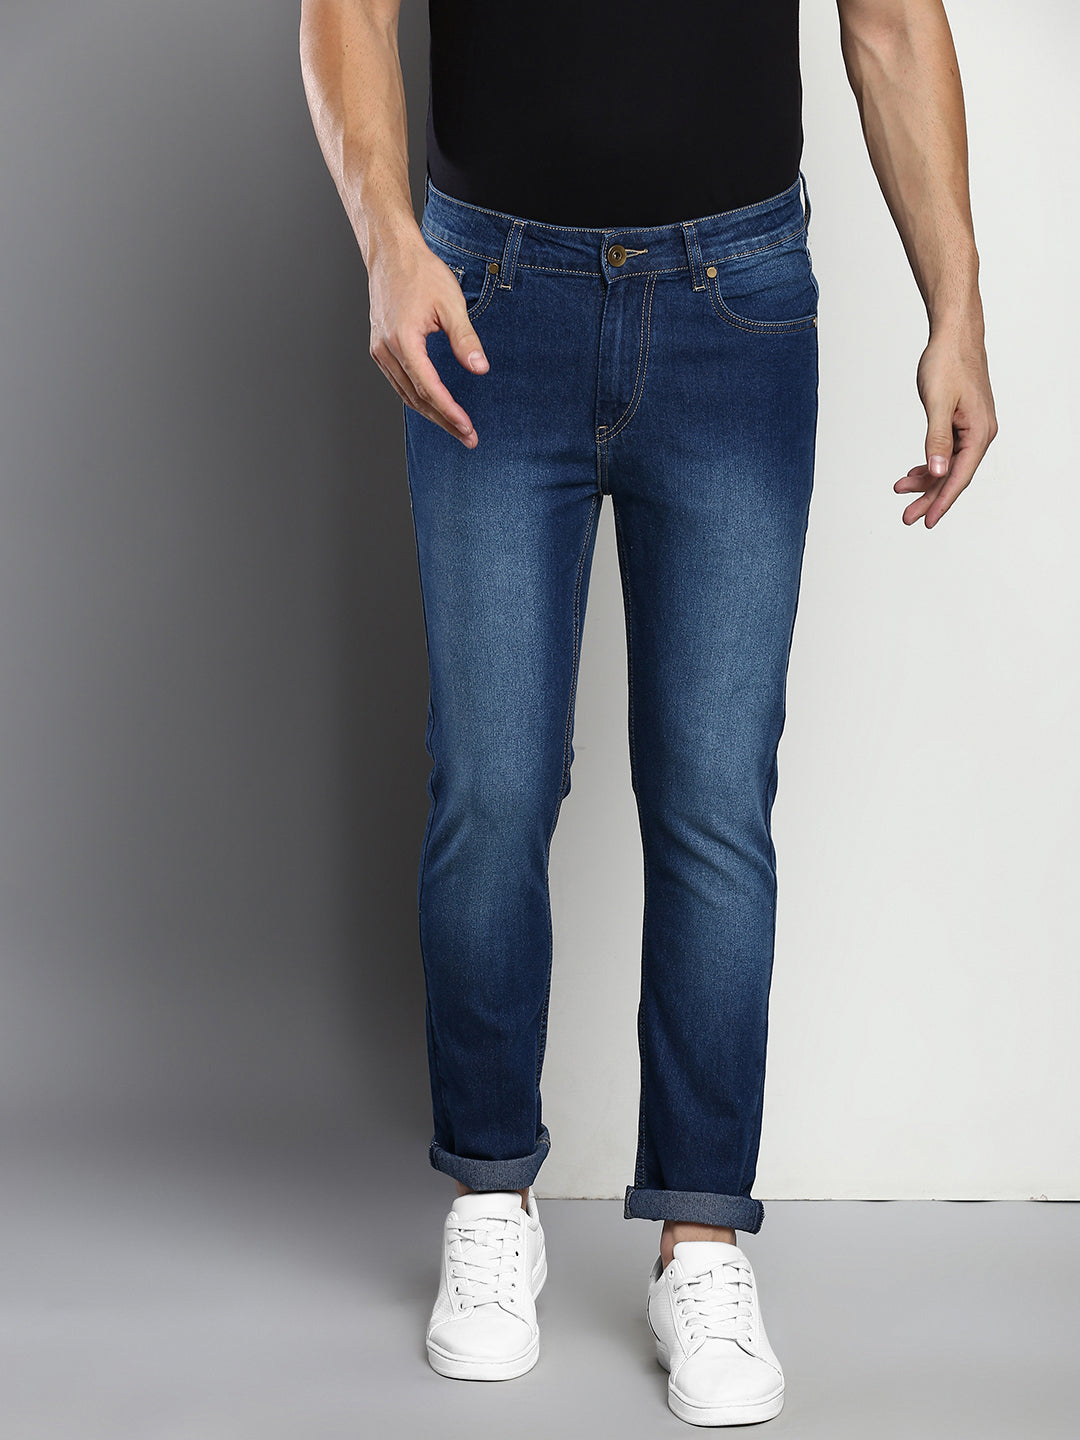 Types of Jeans for Men - Understand These Denim Styles To Buy The Perfect  Jeans For Your Body Type